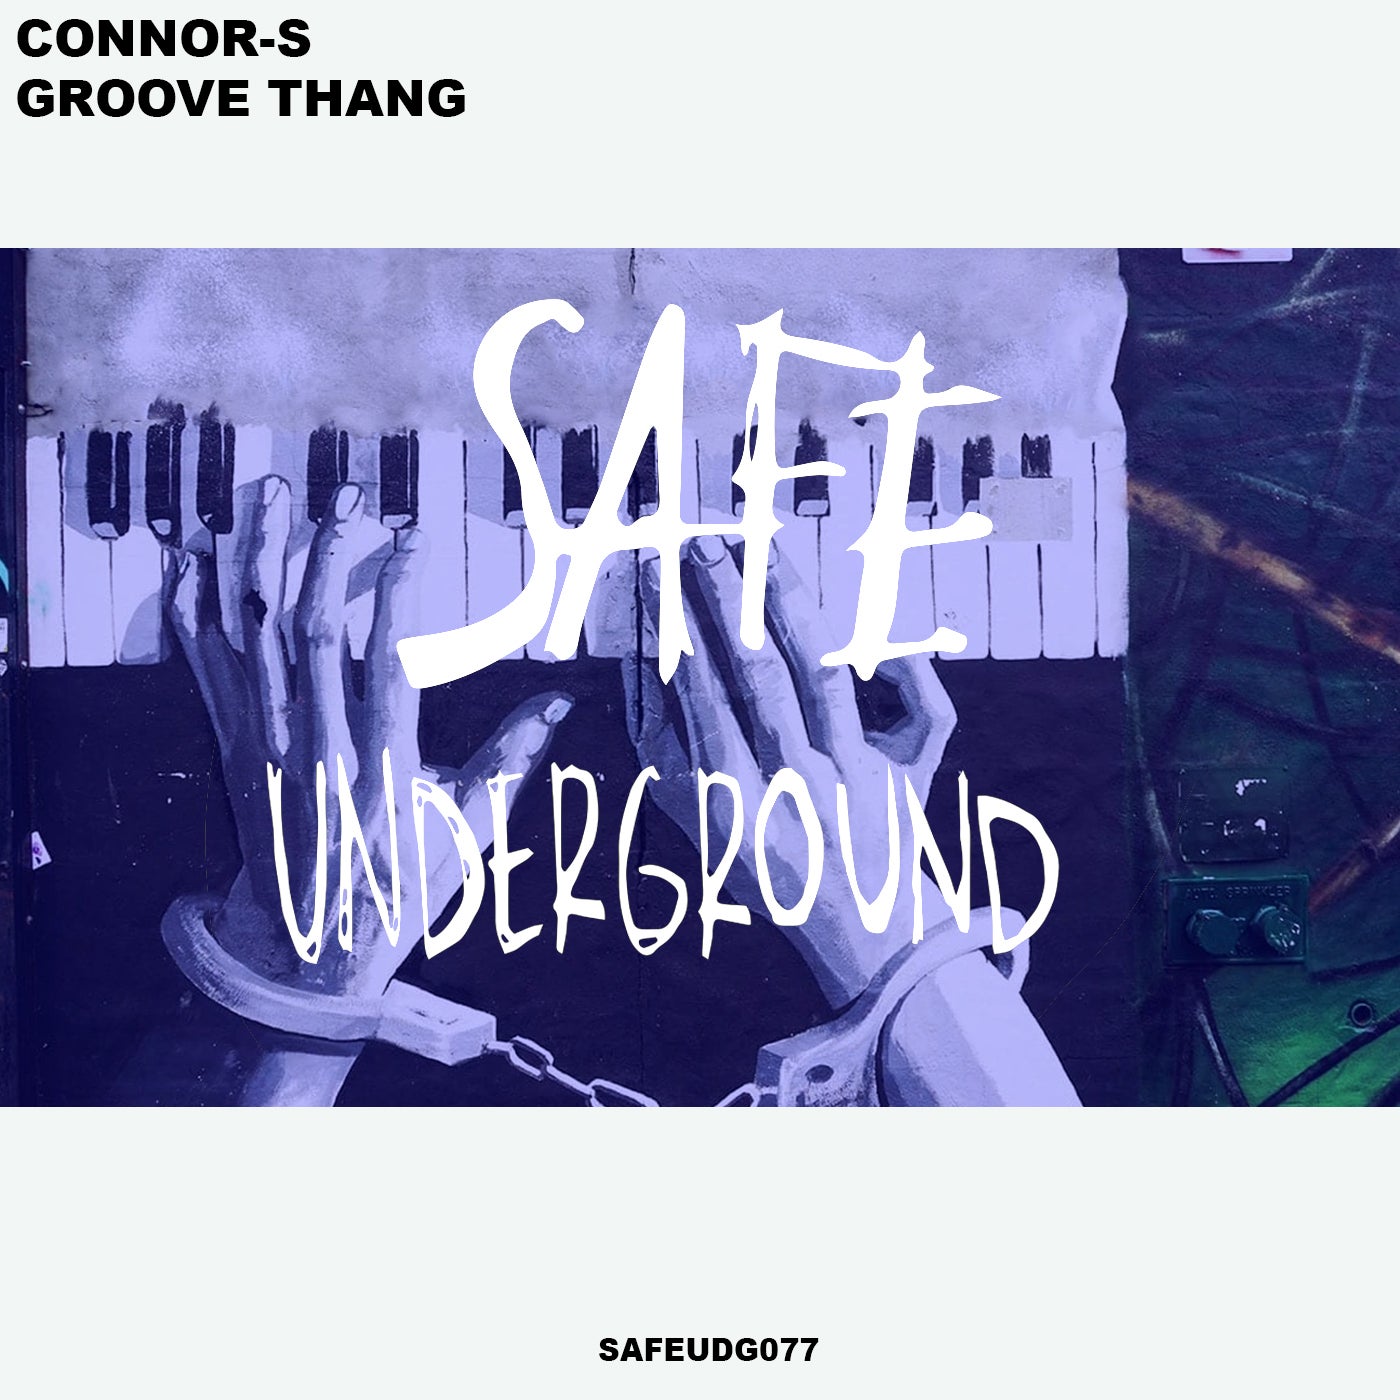 image cover: Connor-S - Groove Thang EP / SAFEUDG077